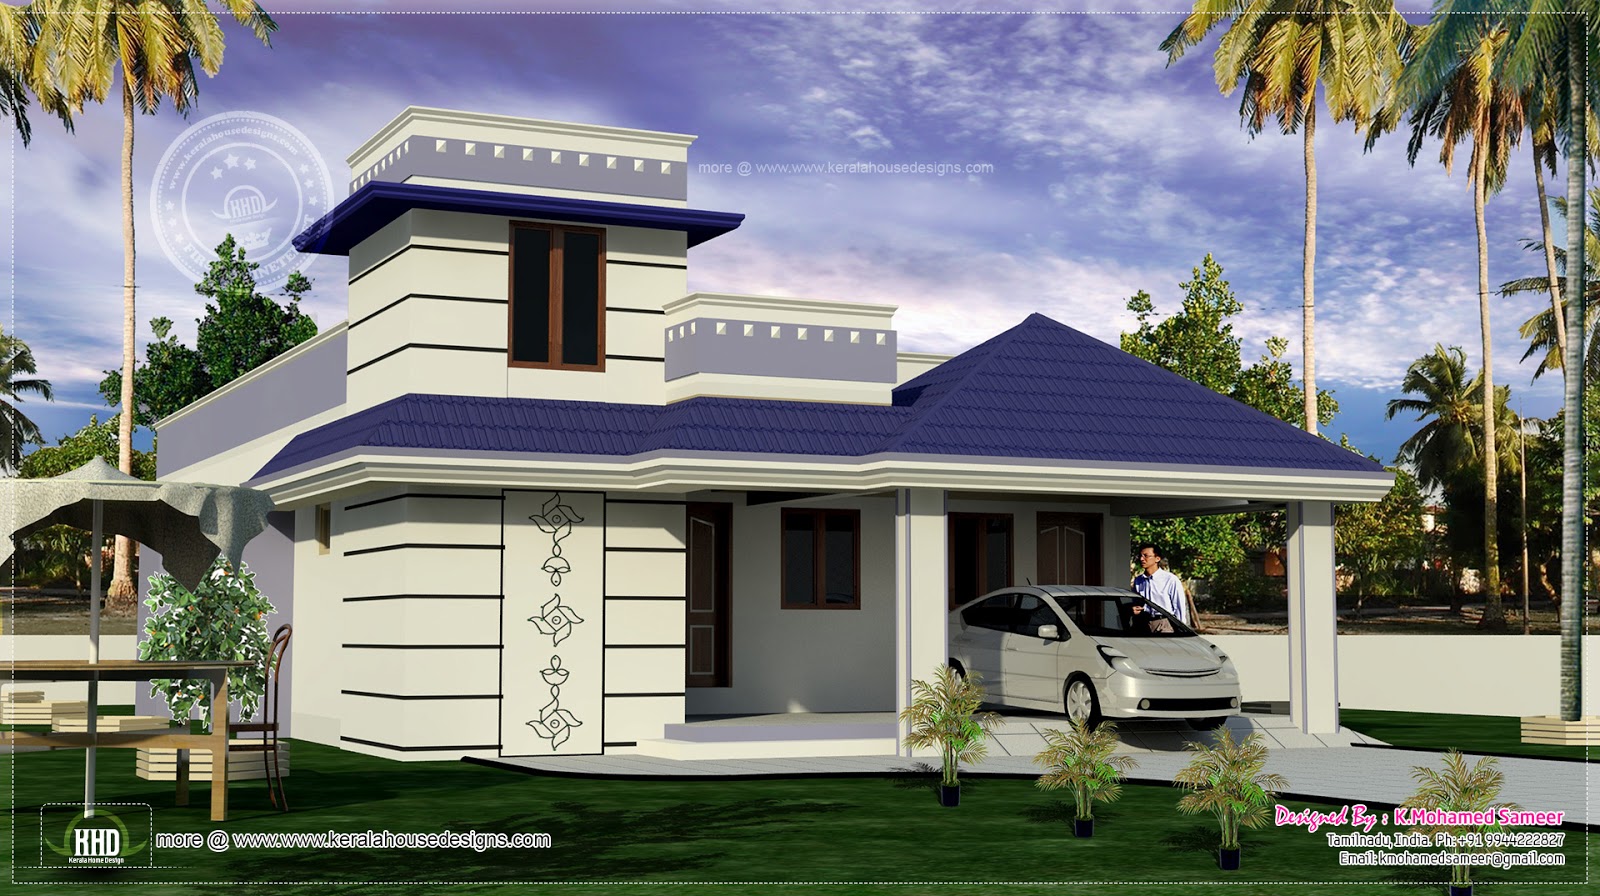 1700 sq.feet one floor for South Indian home